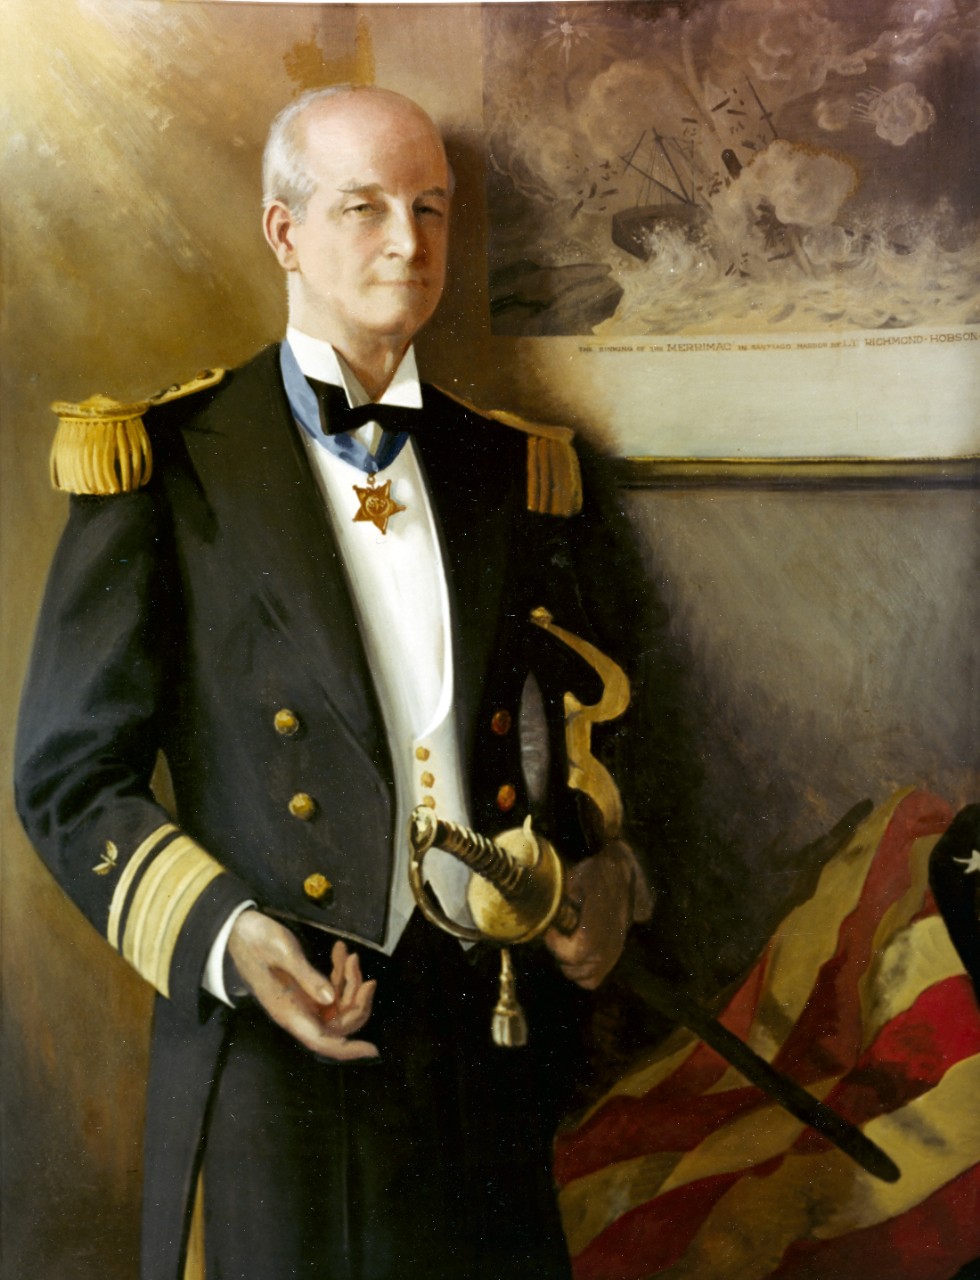 Photo #: KN-10865 Rear Admiral Richmond P. Hobson, USN (Construction Corps, Retired)